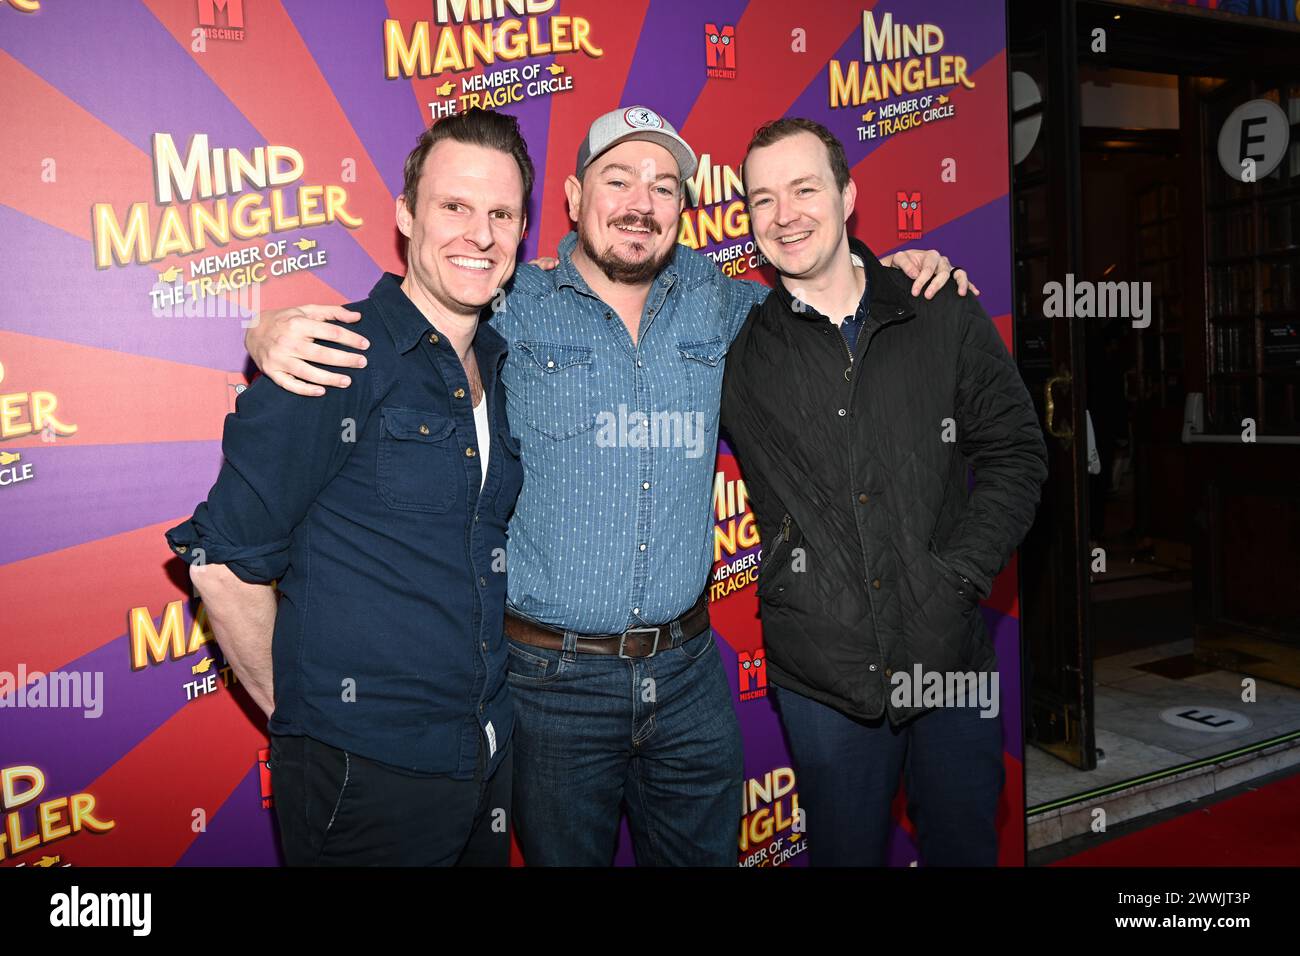 London, UK. 24th Mar, 2024. David Howe, Rob Falconer and Greg Tannahill attends A Gala Performance of Mind Mangler: Member of the Tragic Circle at the Apollo Theatre, London, UK. Credit: See Li/Picture Capital/Alamy Live News Stock Photo